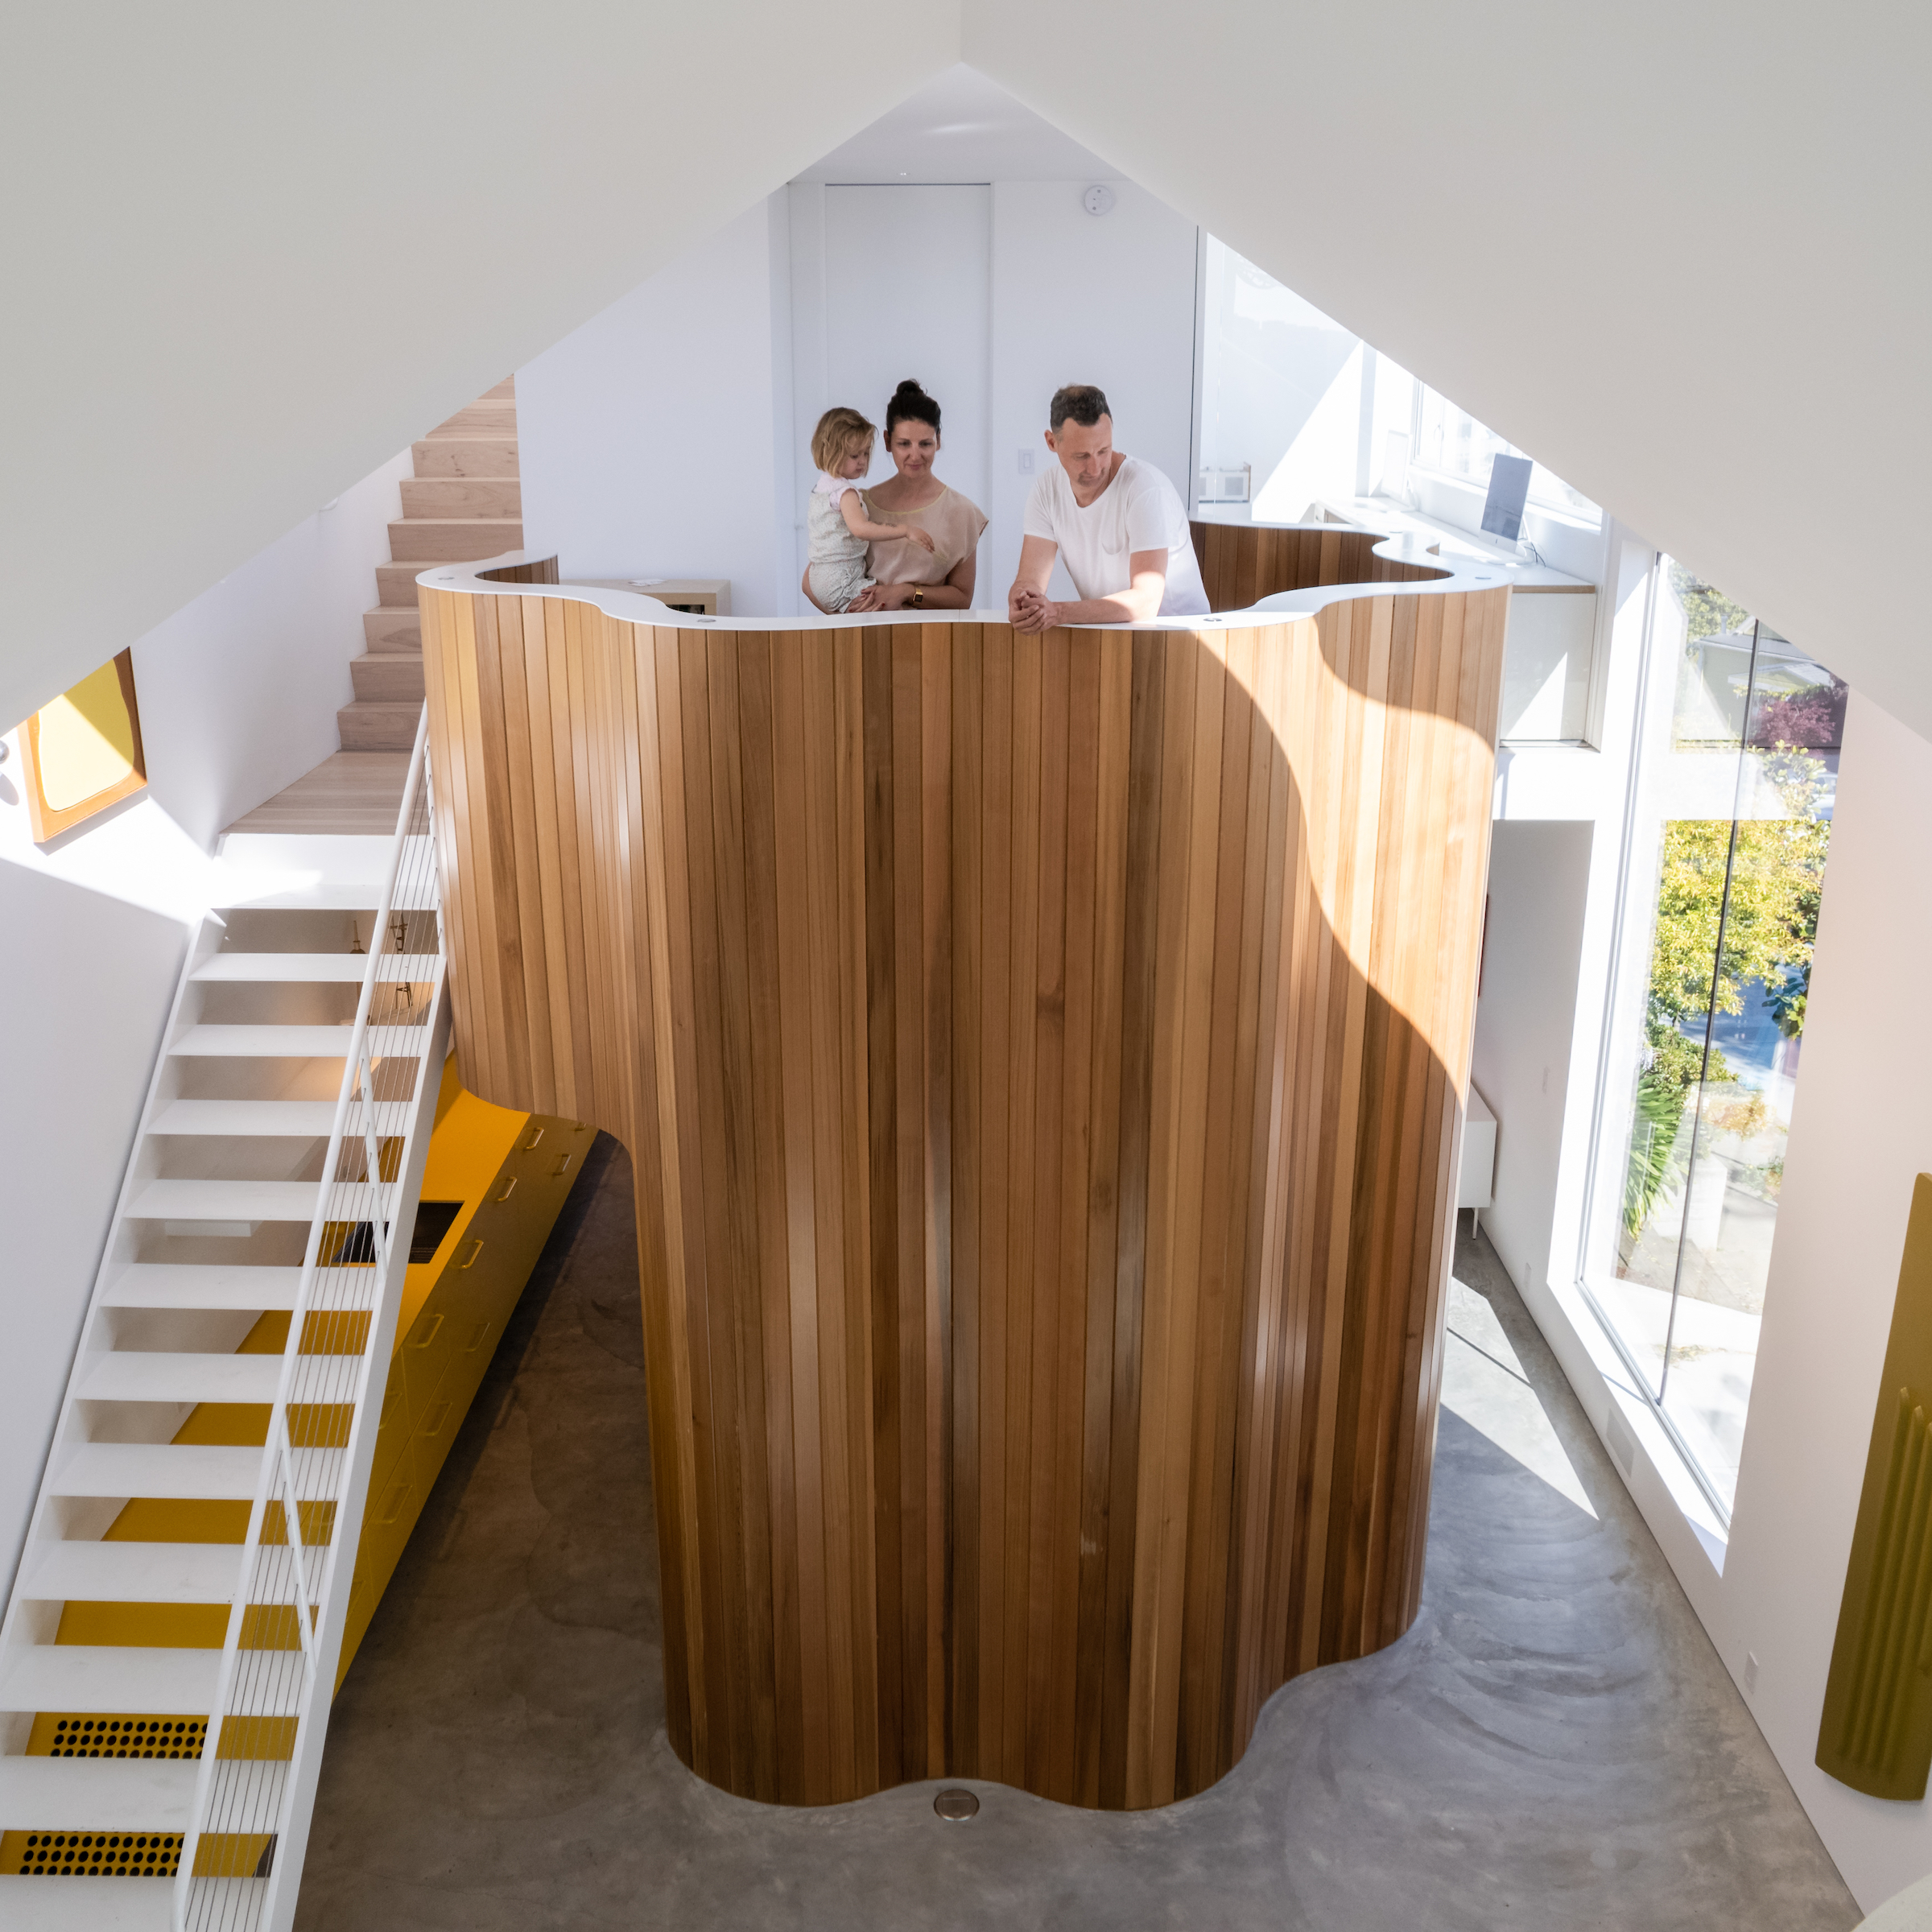 Three people converse by a unique curved wooden wall inside a modern, bright building with white stairs and triangular openings.